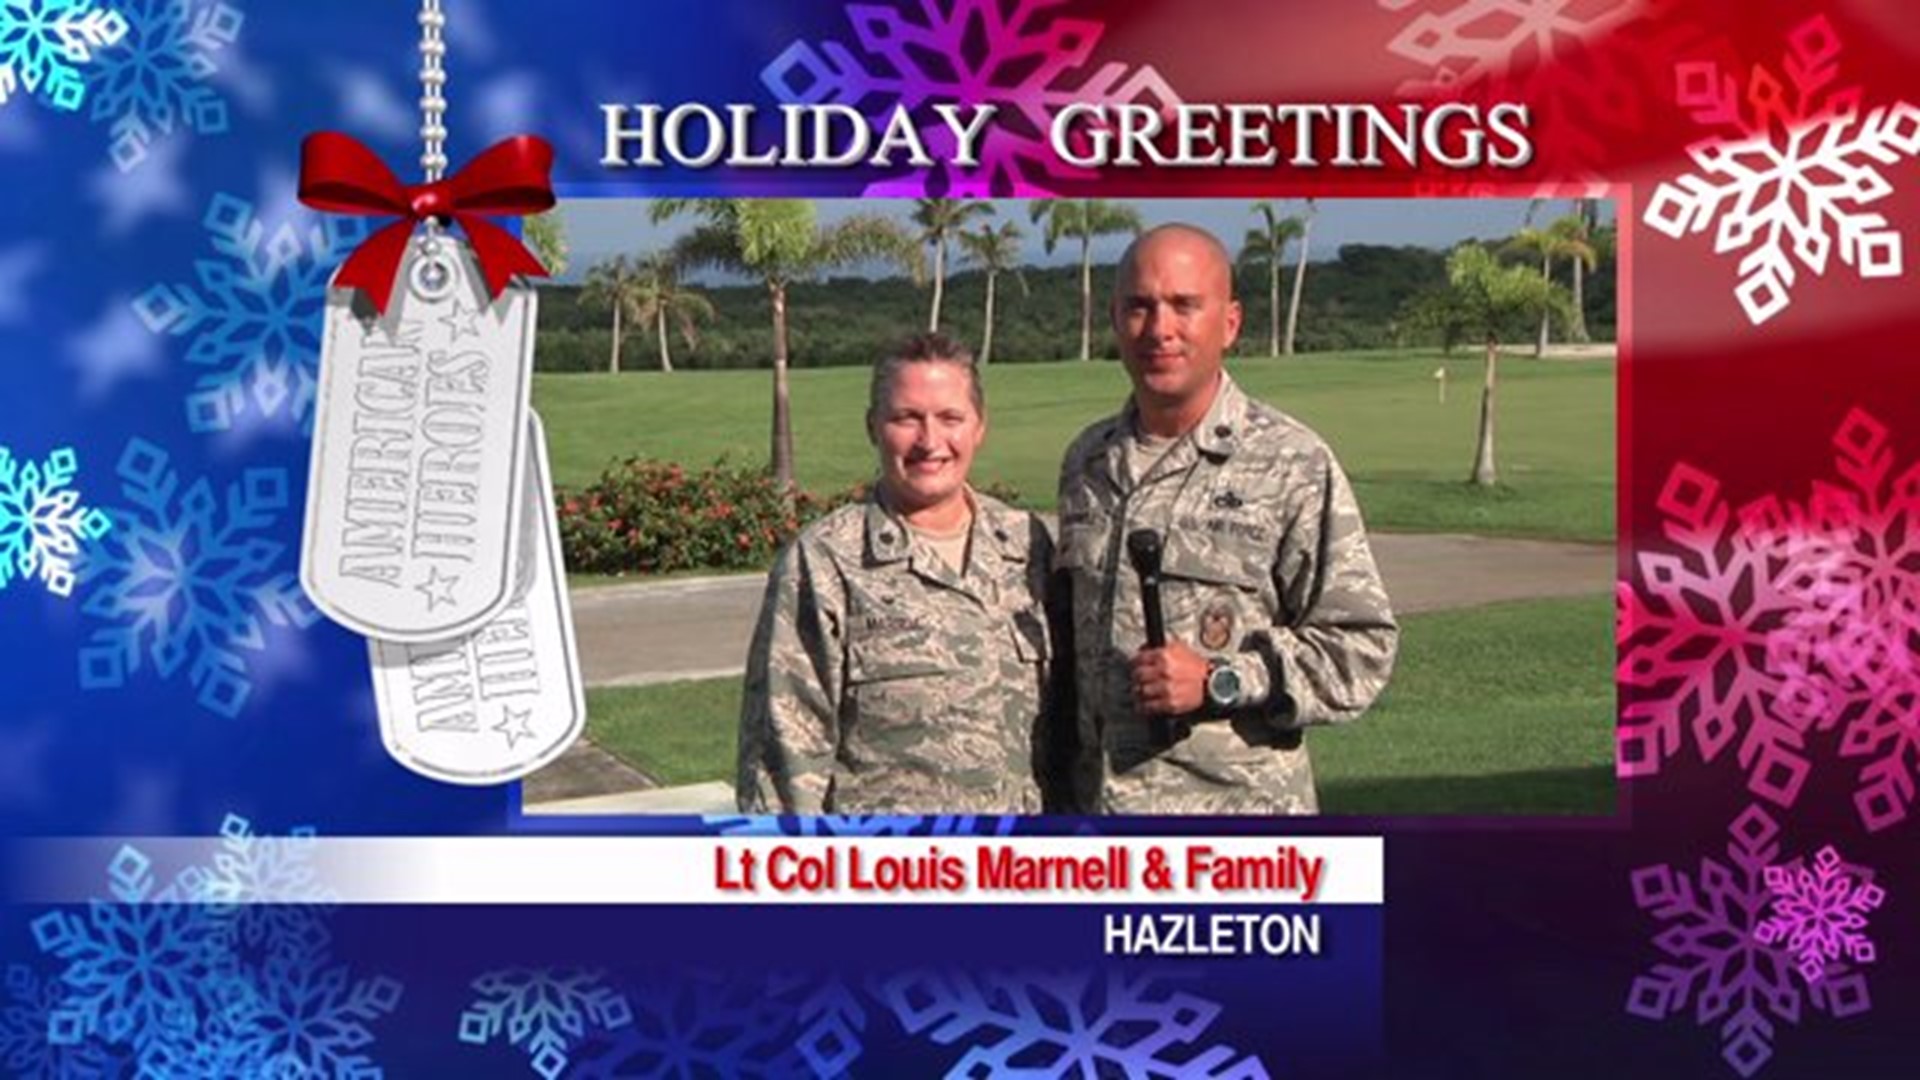 Military Greeting: Lt Col Louis Marnell